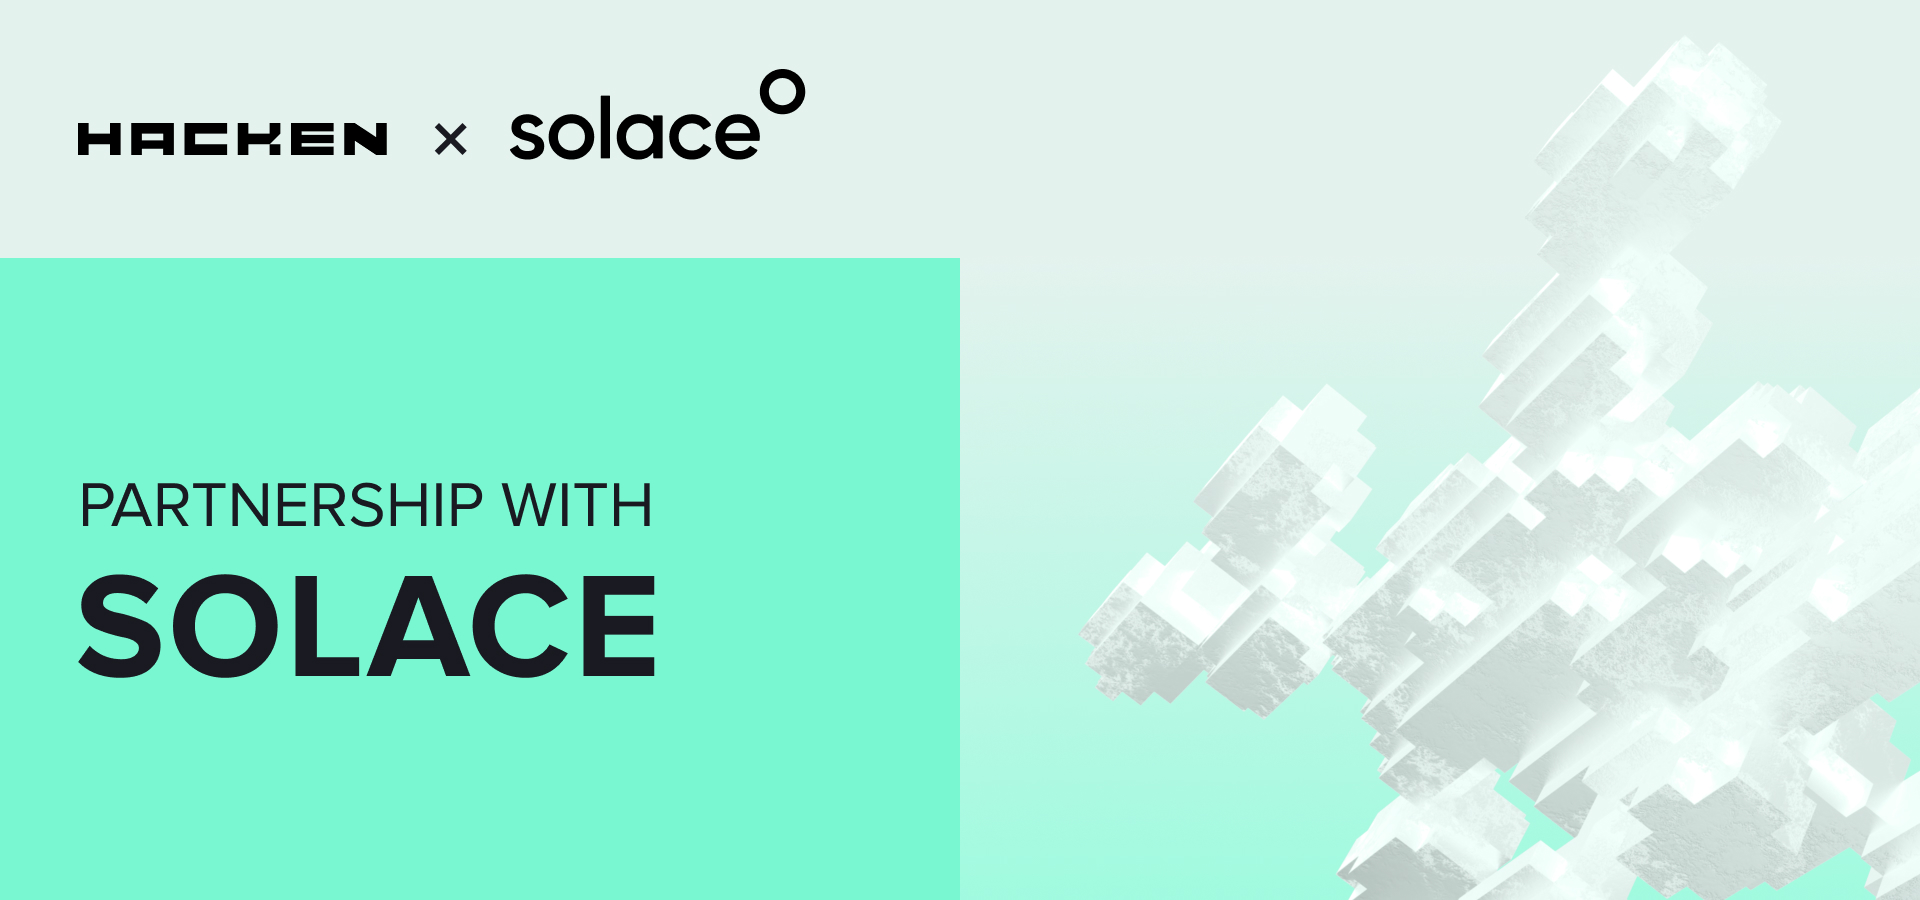 Announcing partnership with Solace